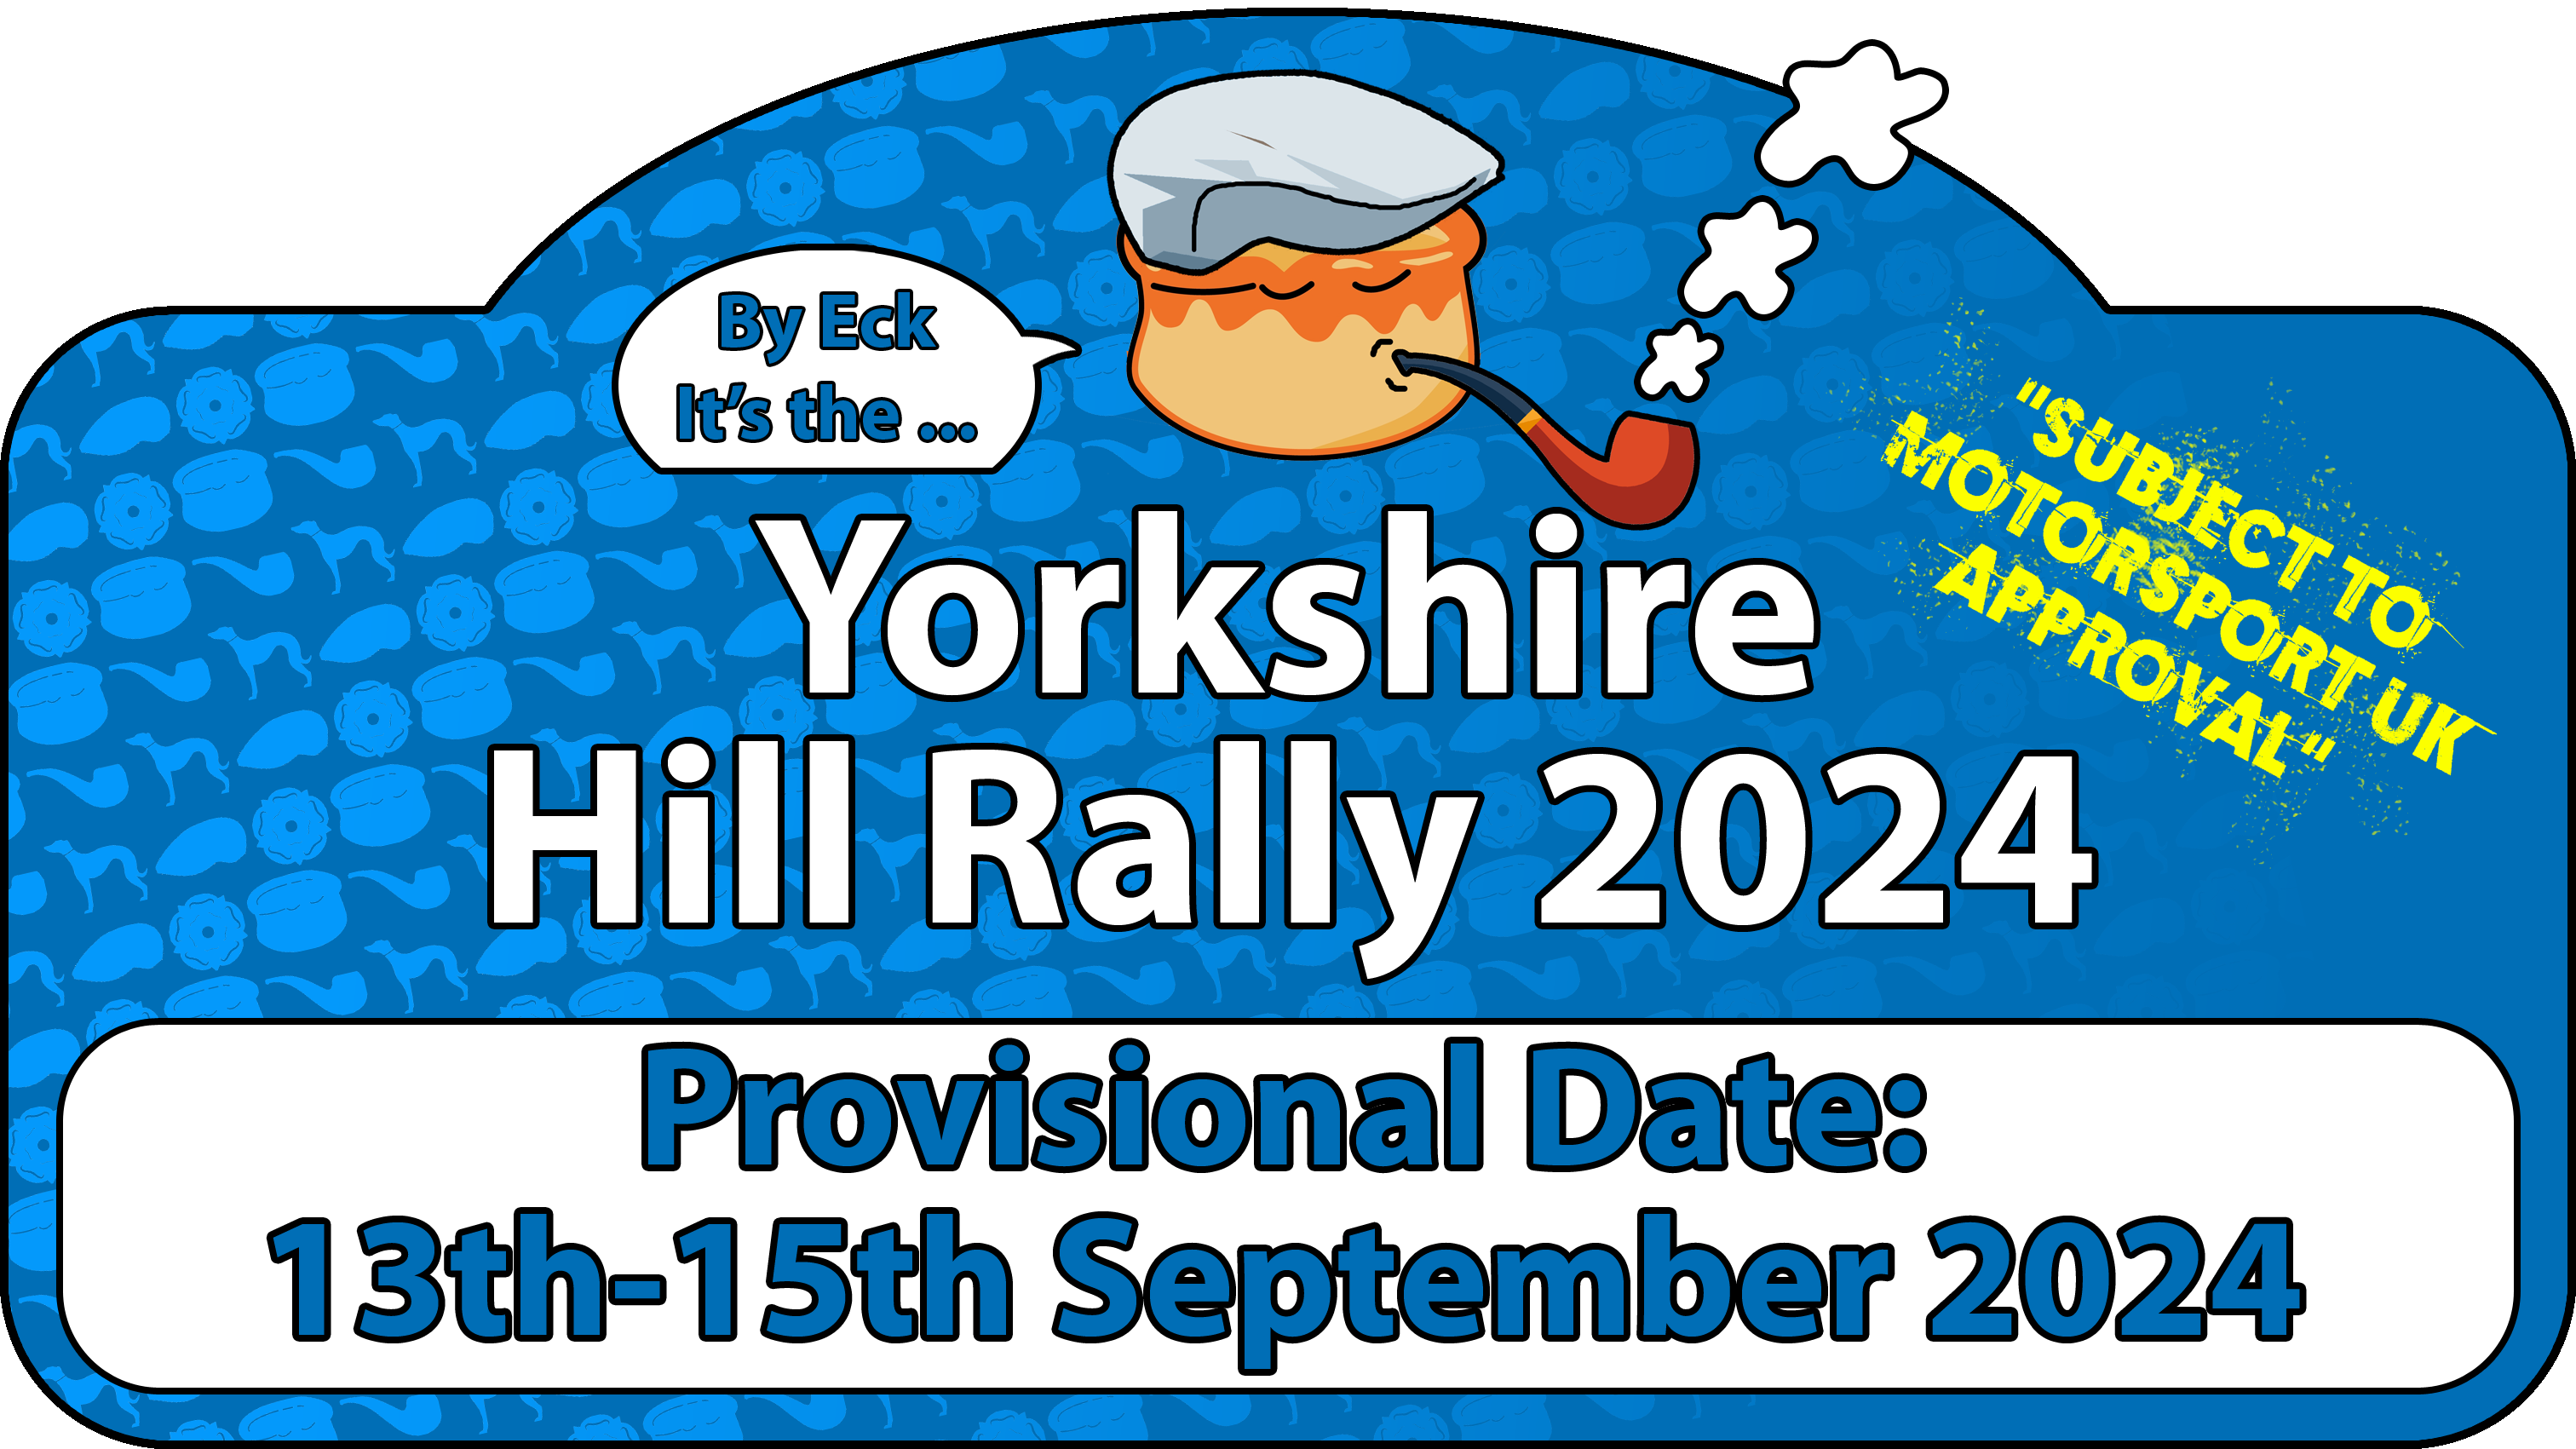 The Yorkshire Hill Rally 2024